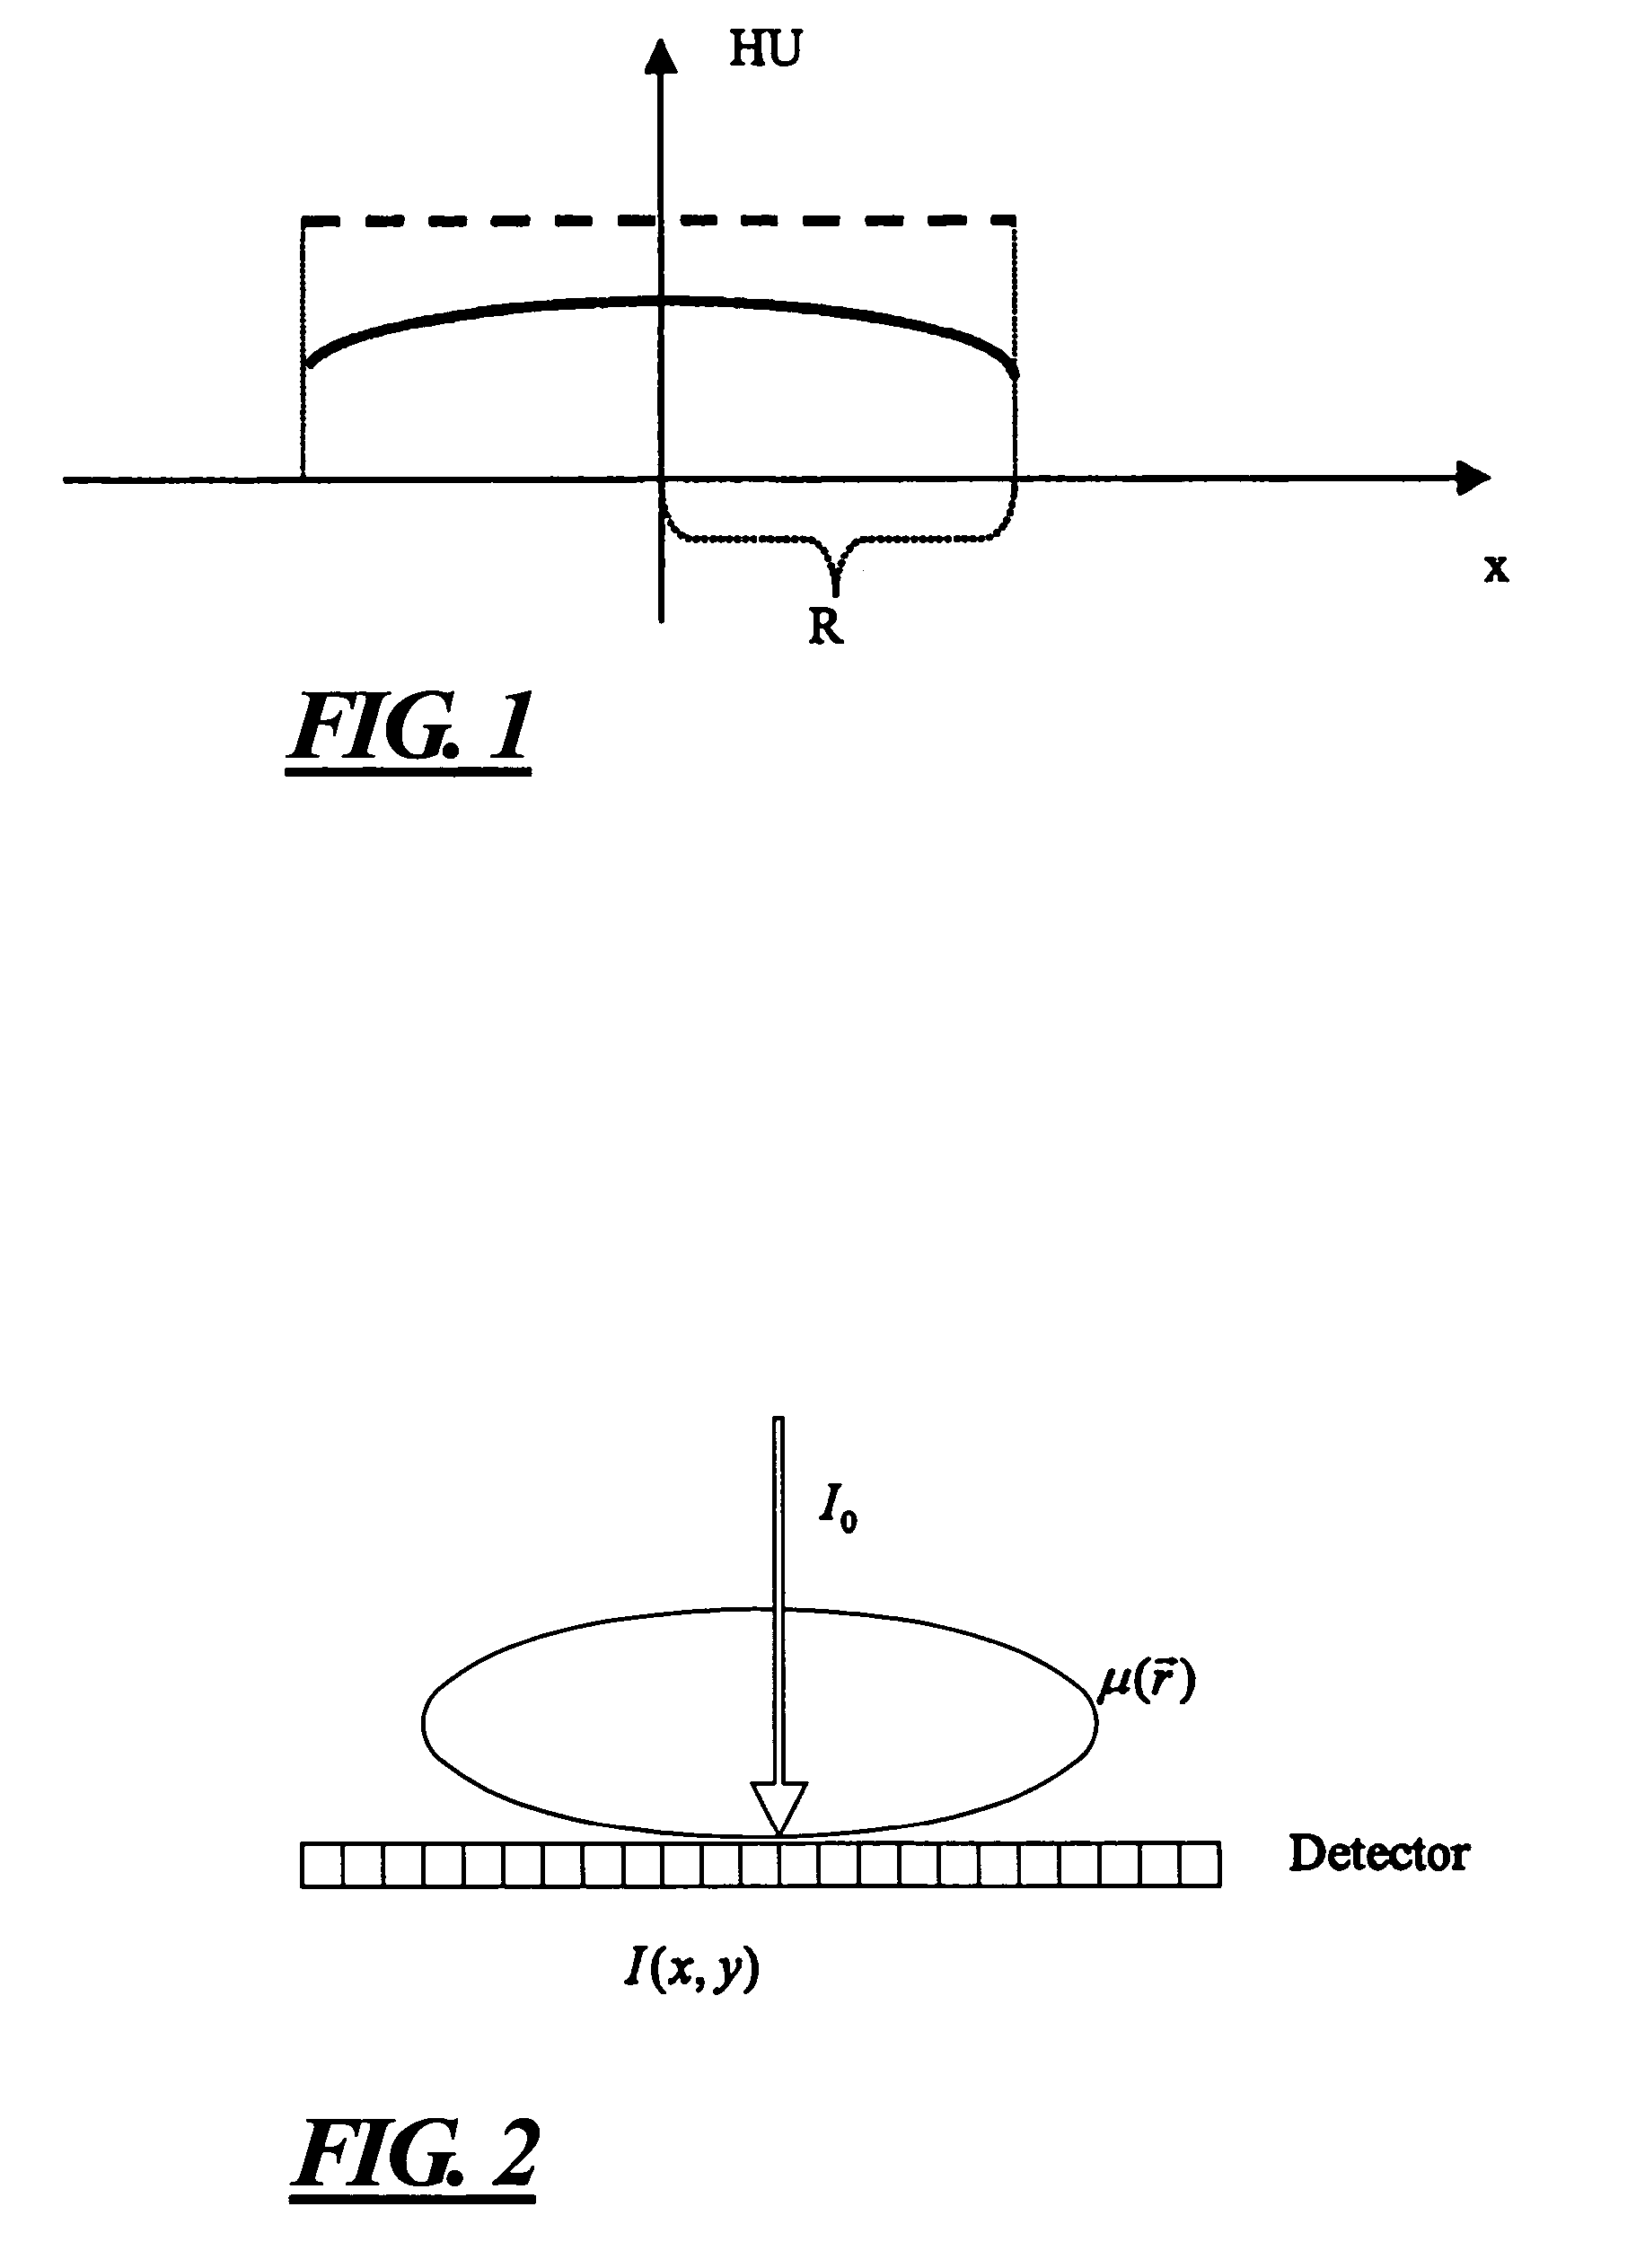 Method for correcting image artifacts due to detector overexposure in computed tomography